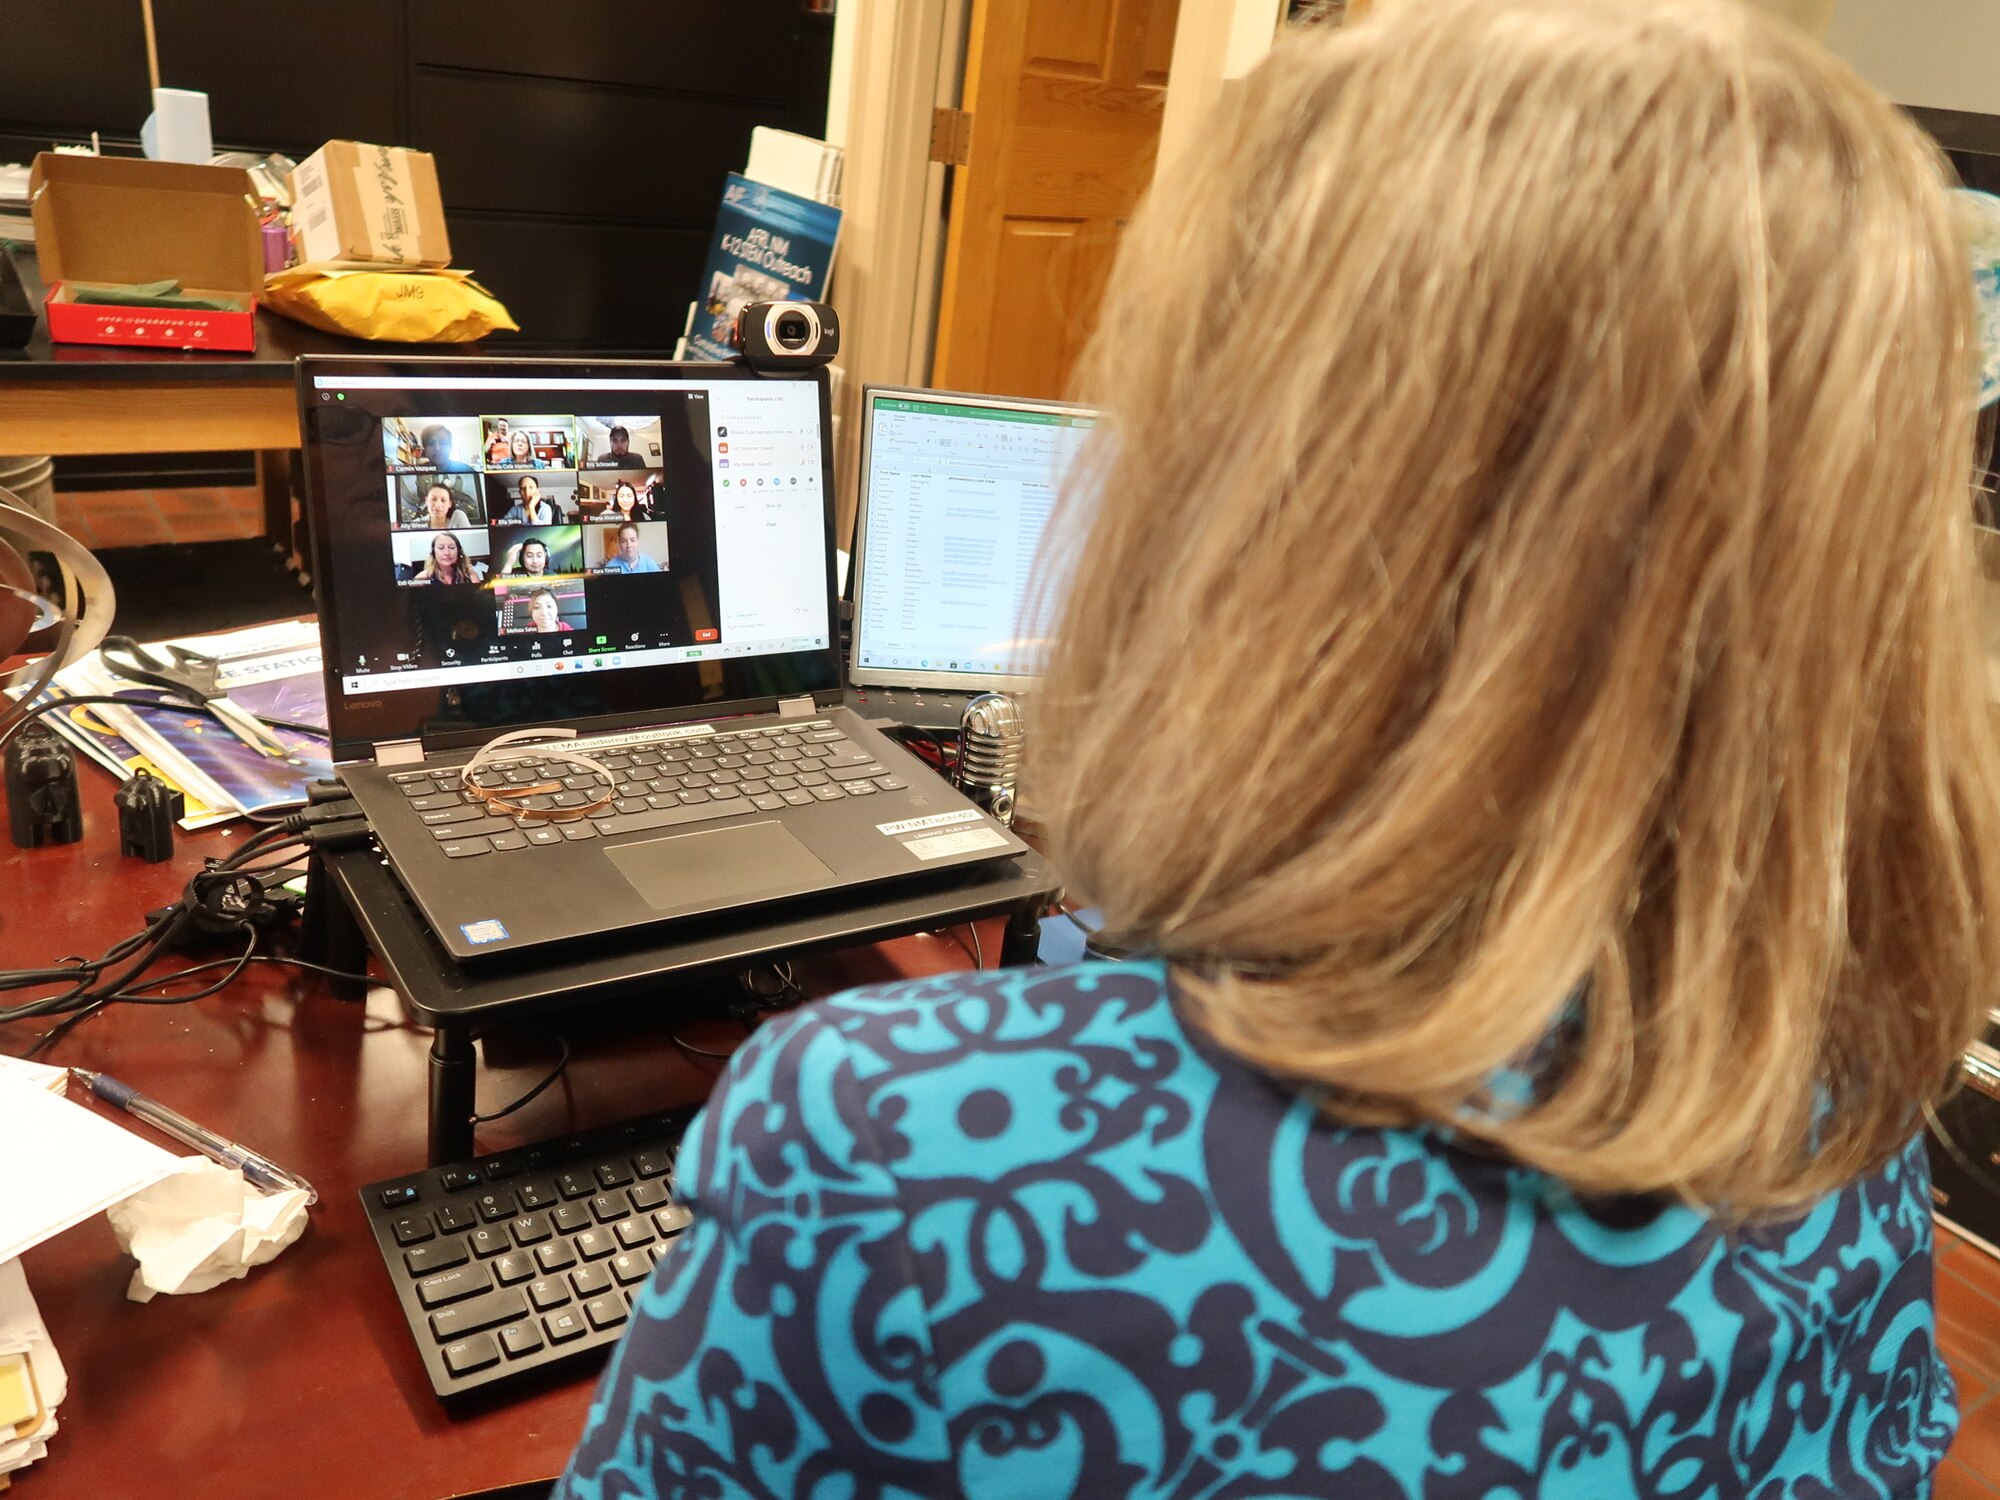 Career STREAM founder Ronda Cole-Harmon conducts a Zoom meeting with the selected mentors from the University of New Mexico and New Mexico Institute of Mining and Technology. (U.S. Air Force photo/Steve Burke)